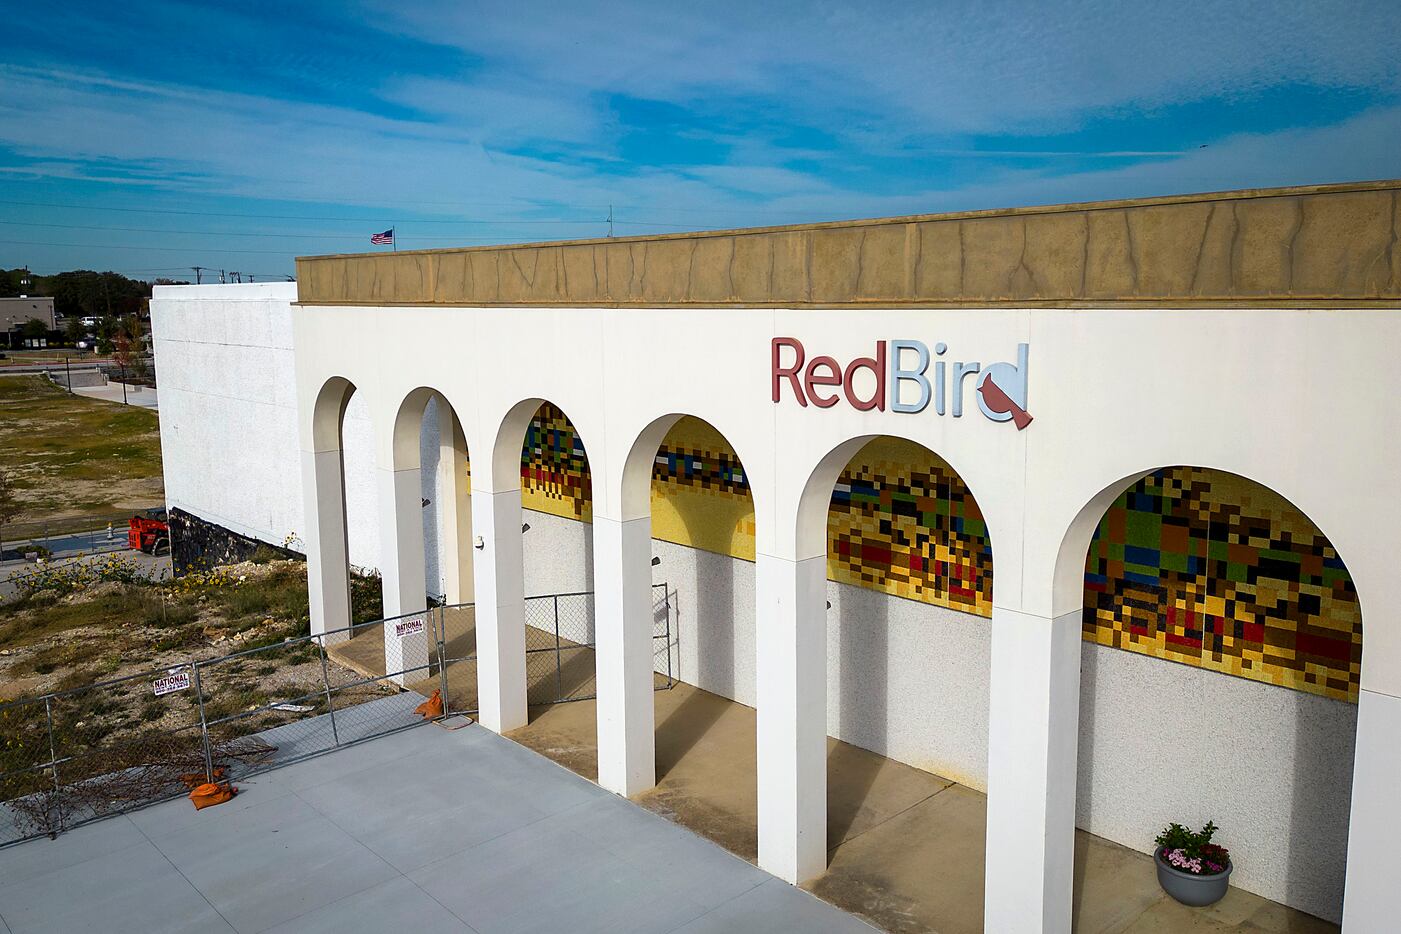 The RedBird development includes recycled portions of the former Red Bird Mall in Southwest...